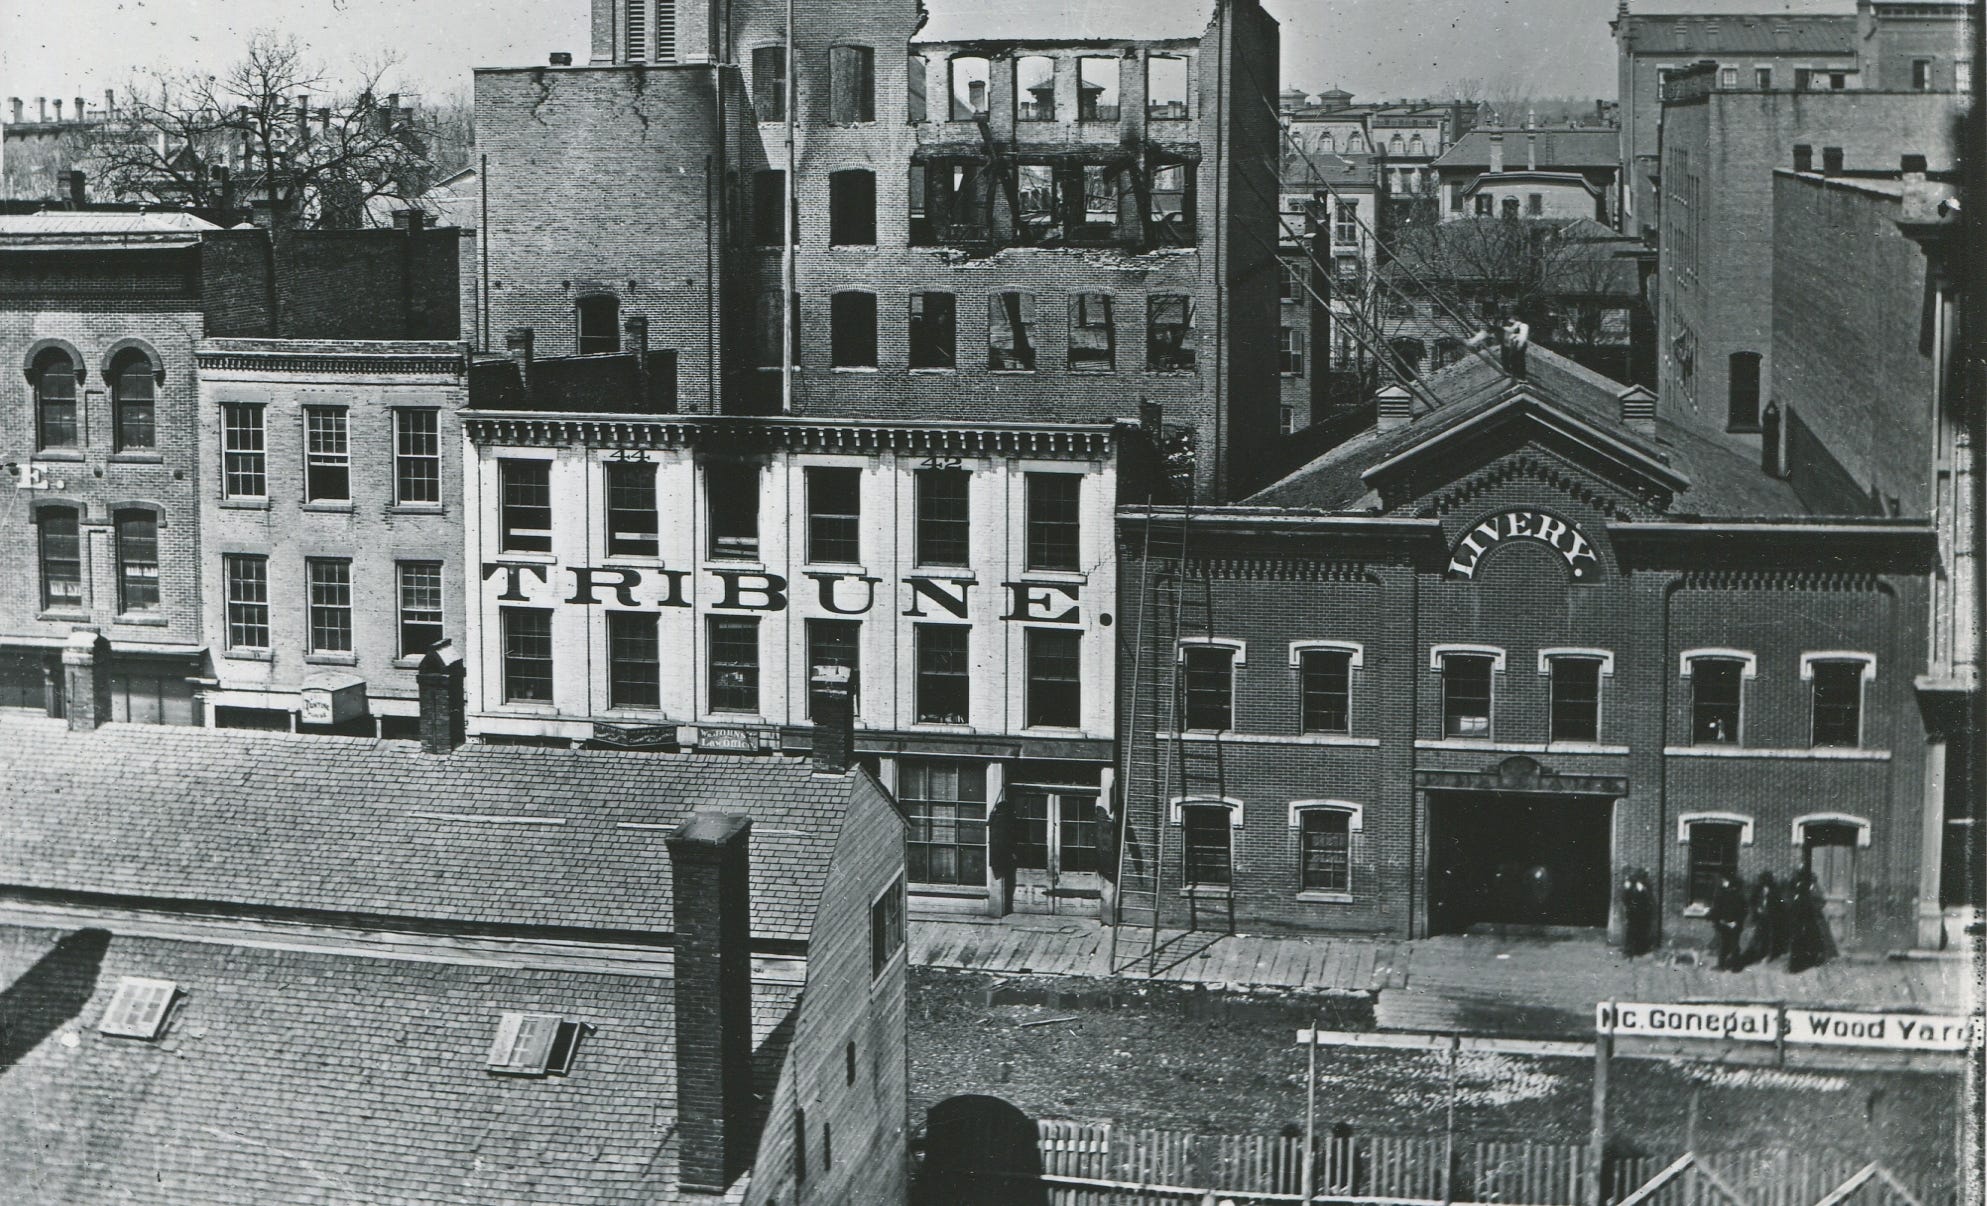 The former Detroit Tribune building is seen on Larned Street in this undated photo from the early 1900s.